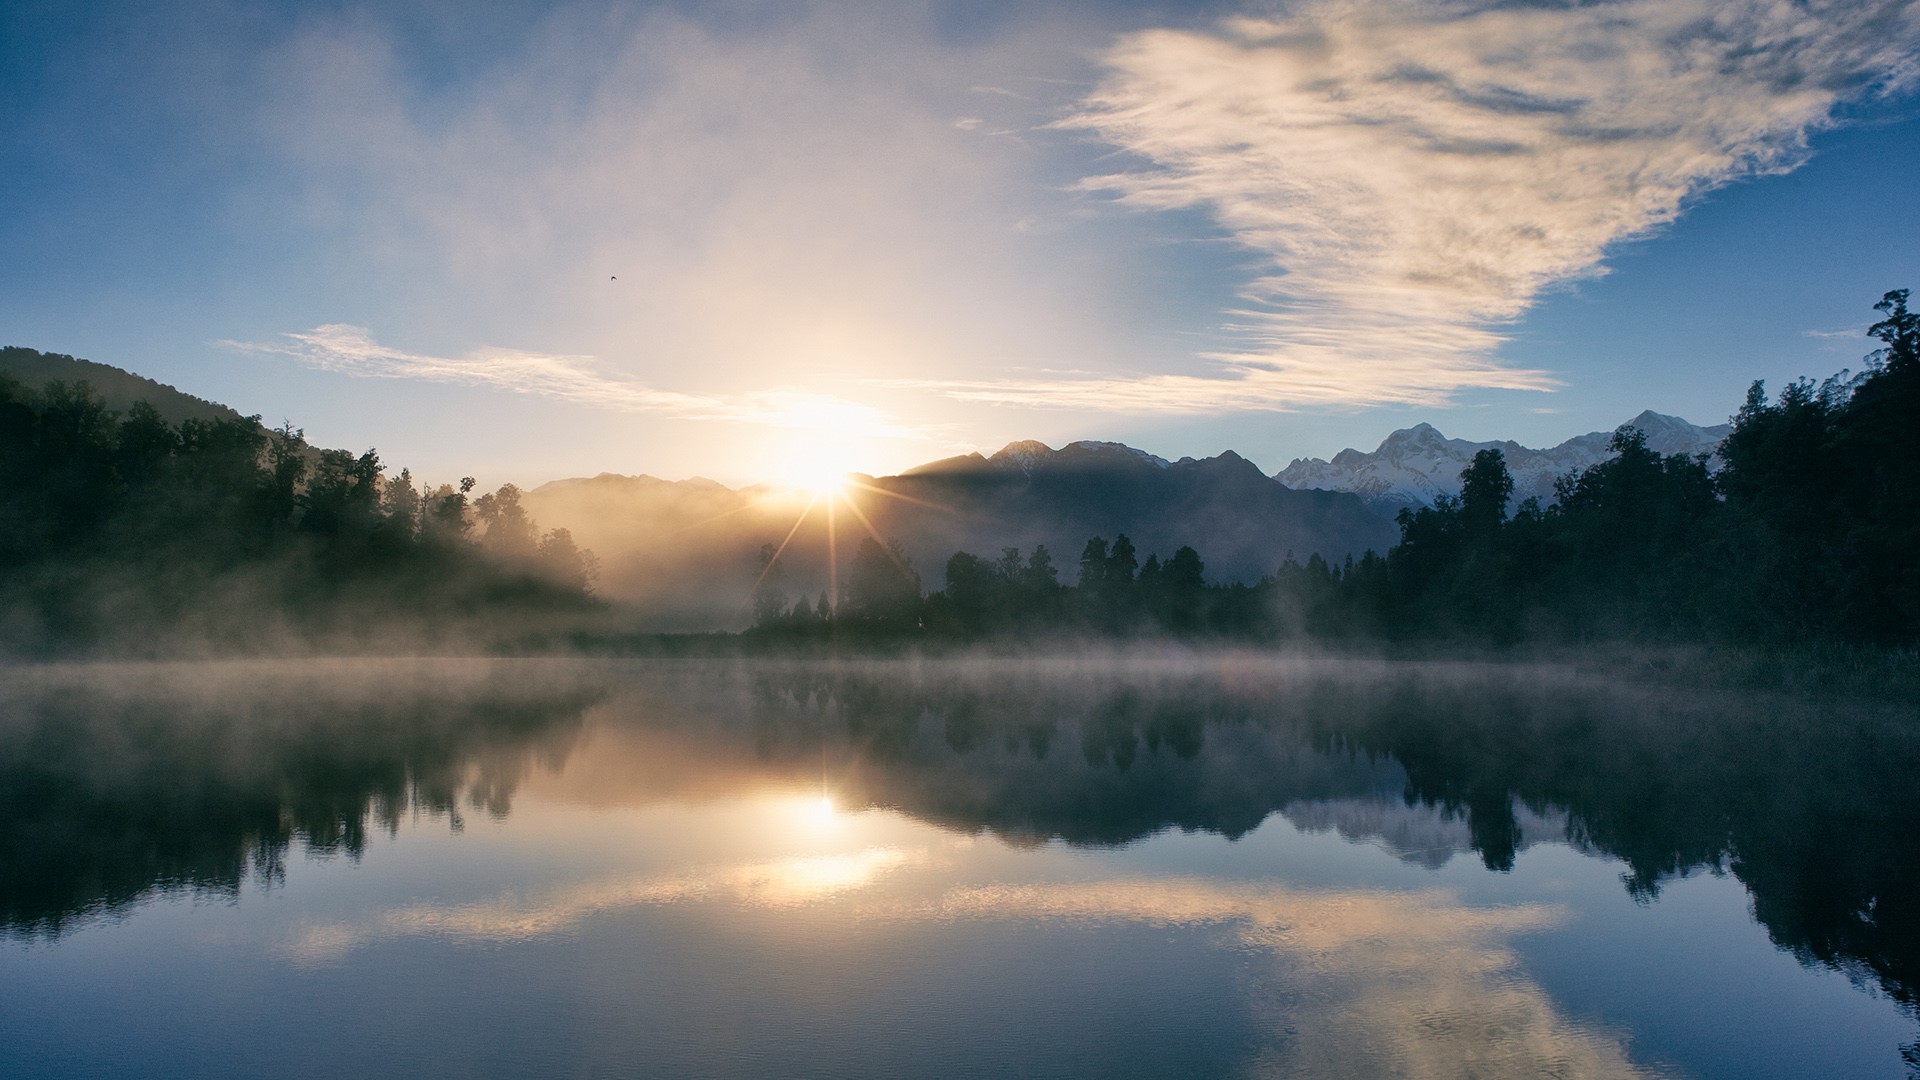 General 1920x1080 nature landscape clouds sky water trees forest lake reflection sunrise sun rays mist mountains snowy mountain Lake Matheson New Zealand